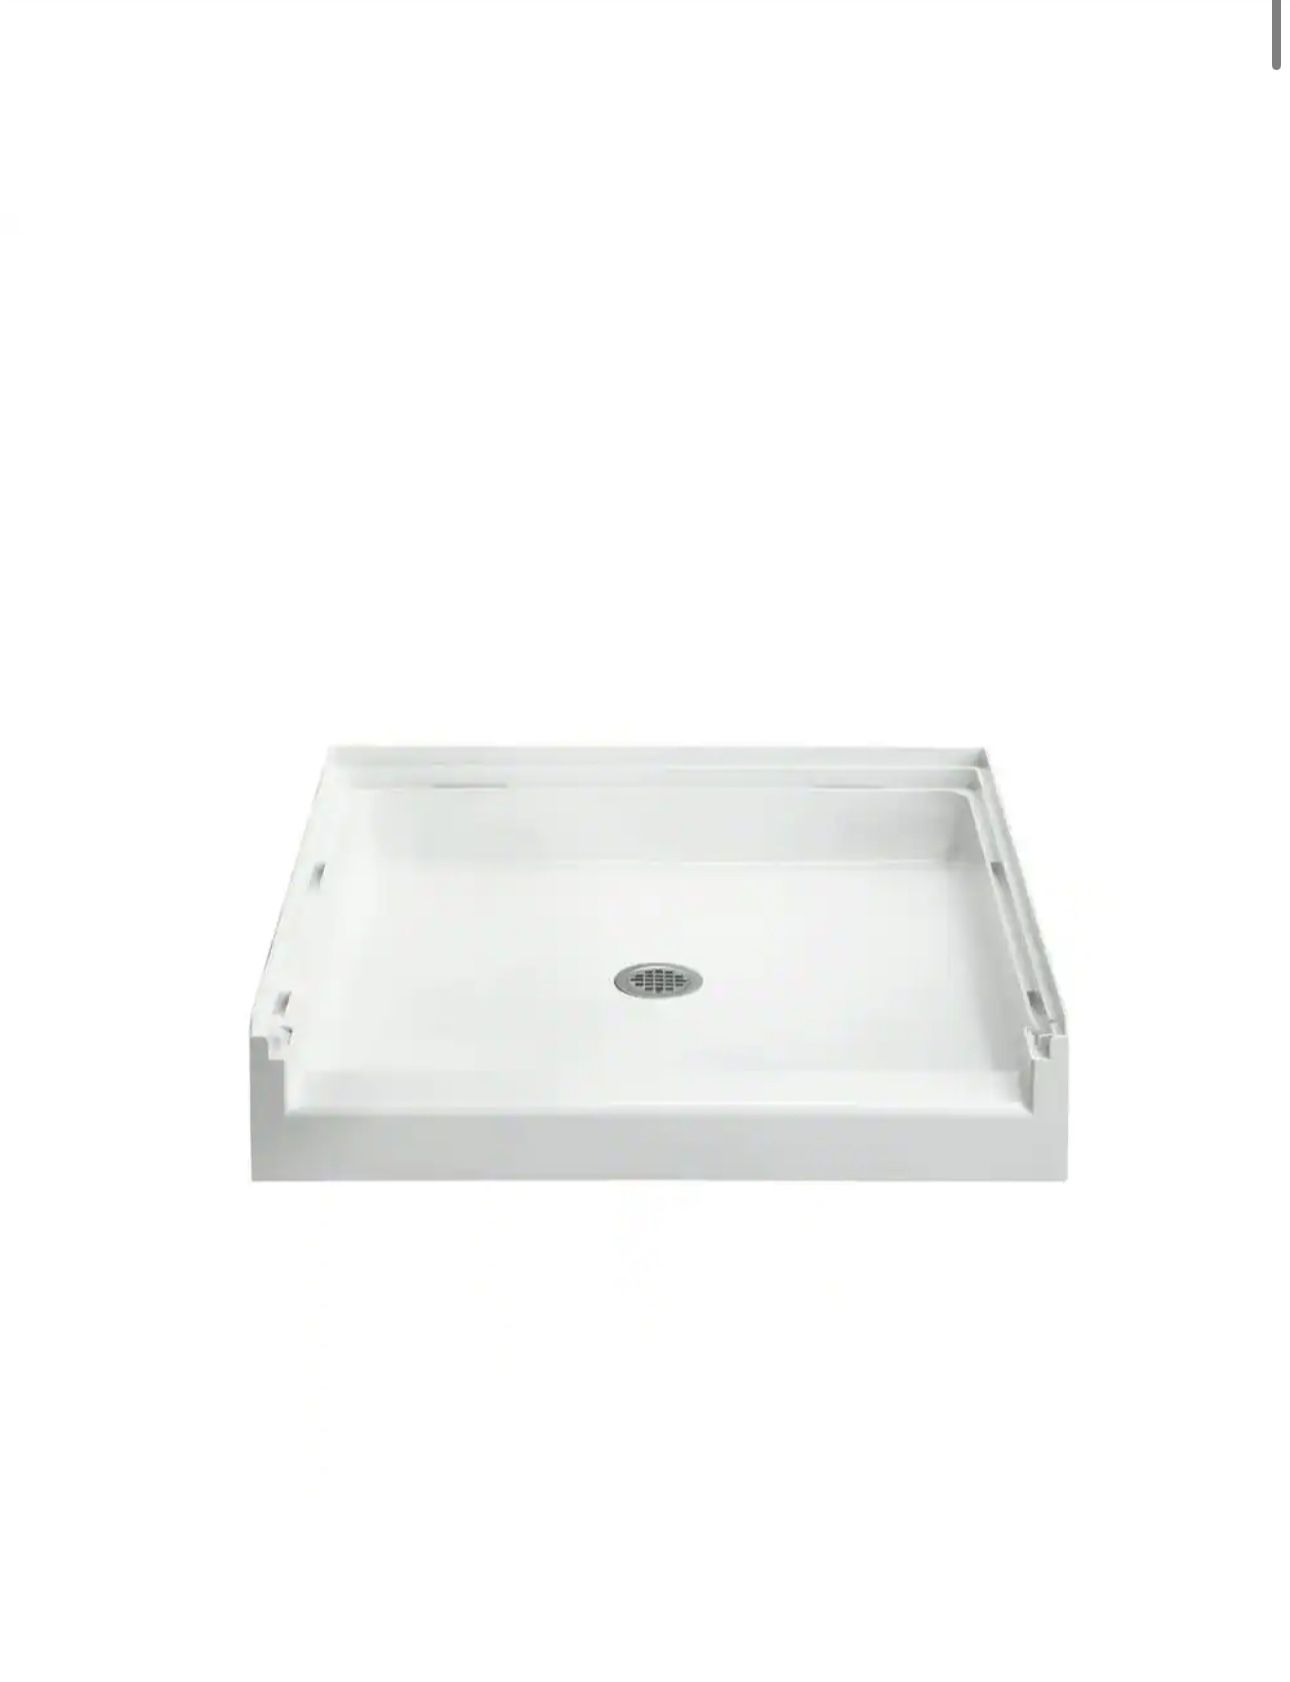 STERLING (Brand Rating: 3.6/5) Accord 36 in. x 36 in. Single Threshold Base in White